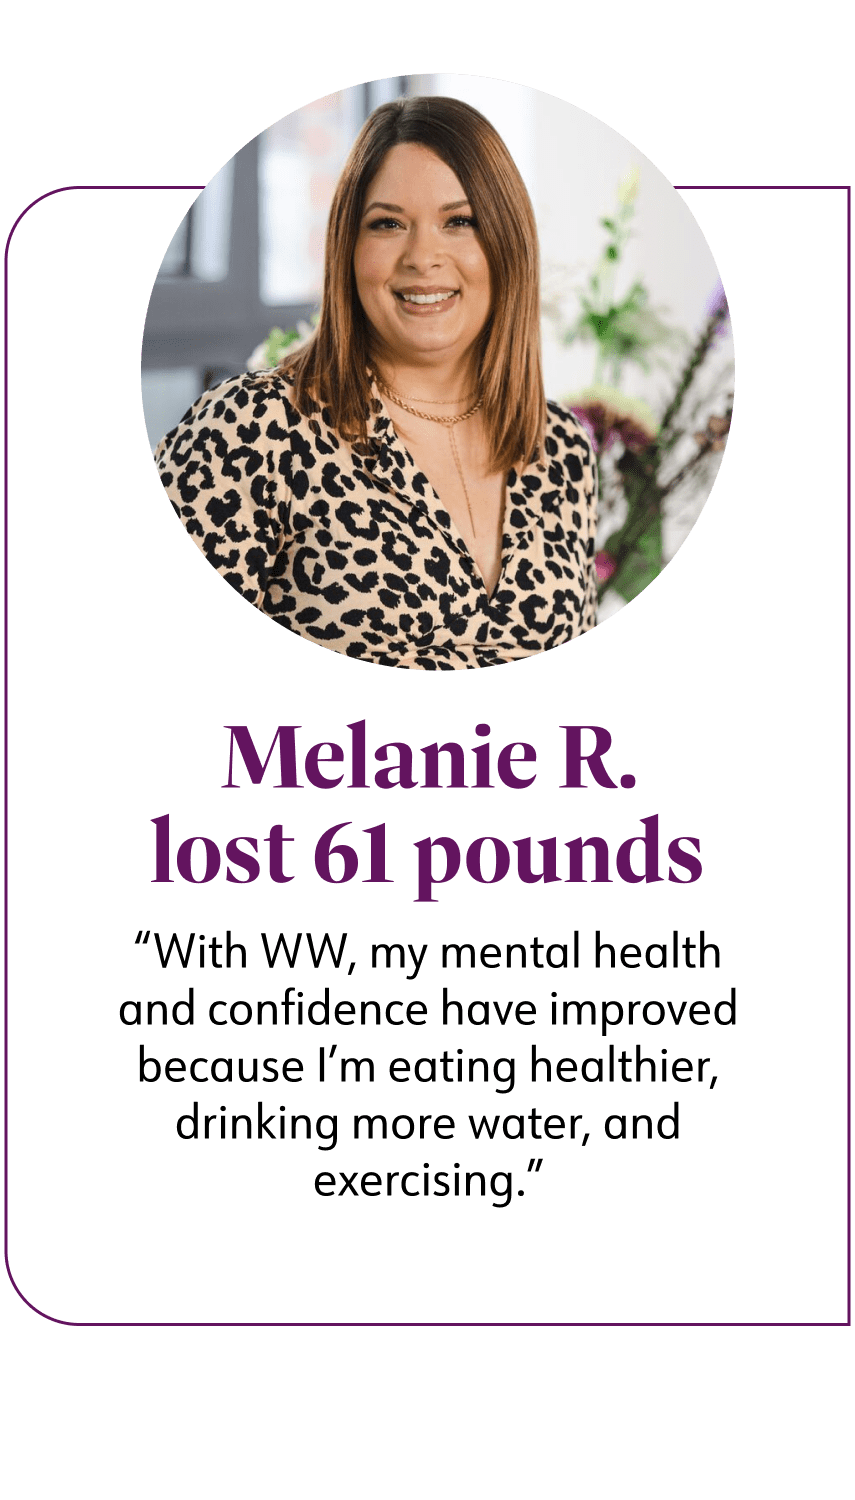 Melanie R, WW member after 61 pound weight loss